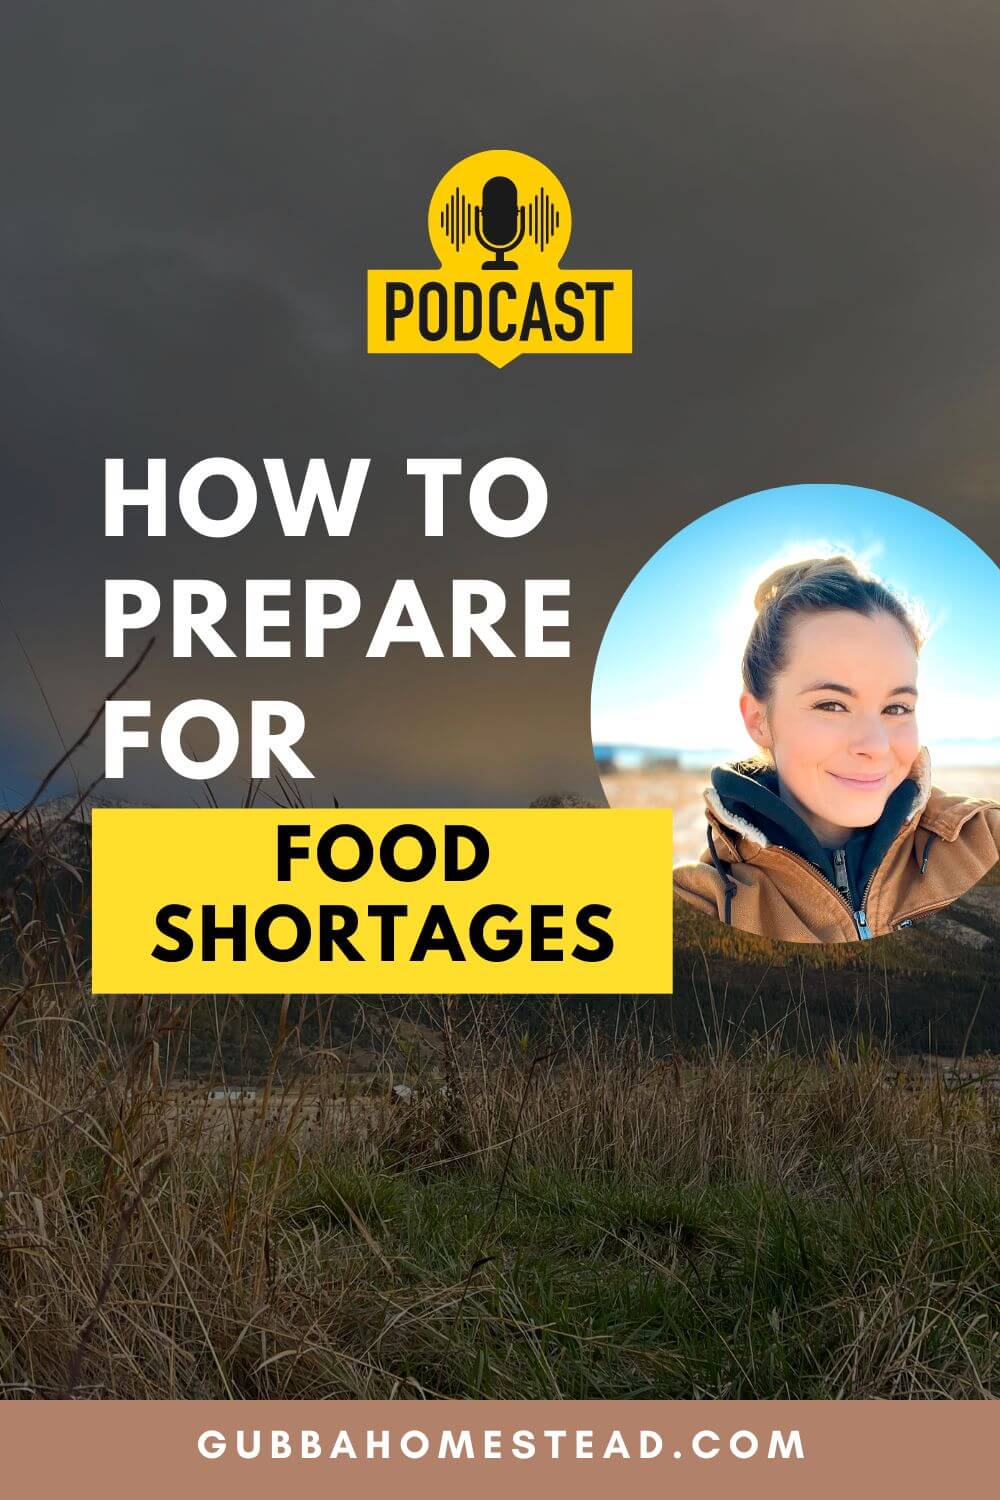 How To Prepare For Food Shortages